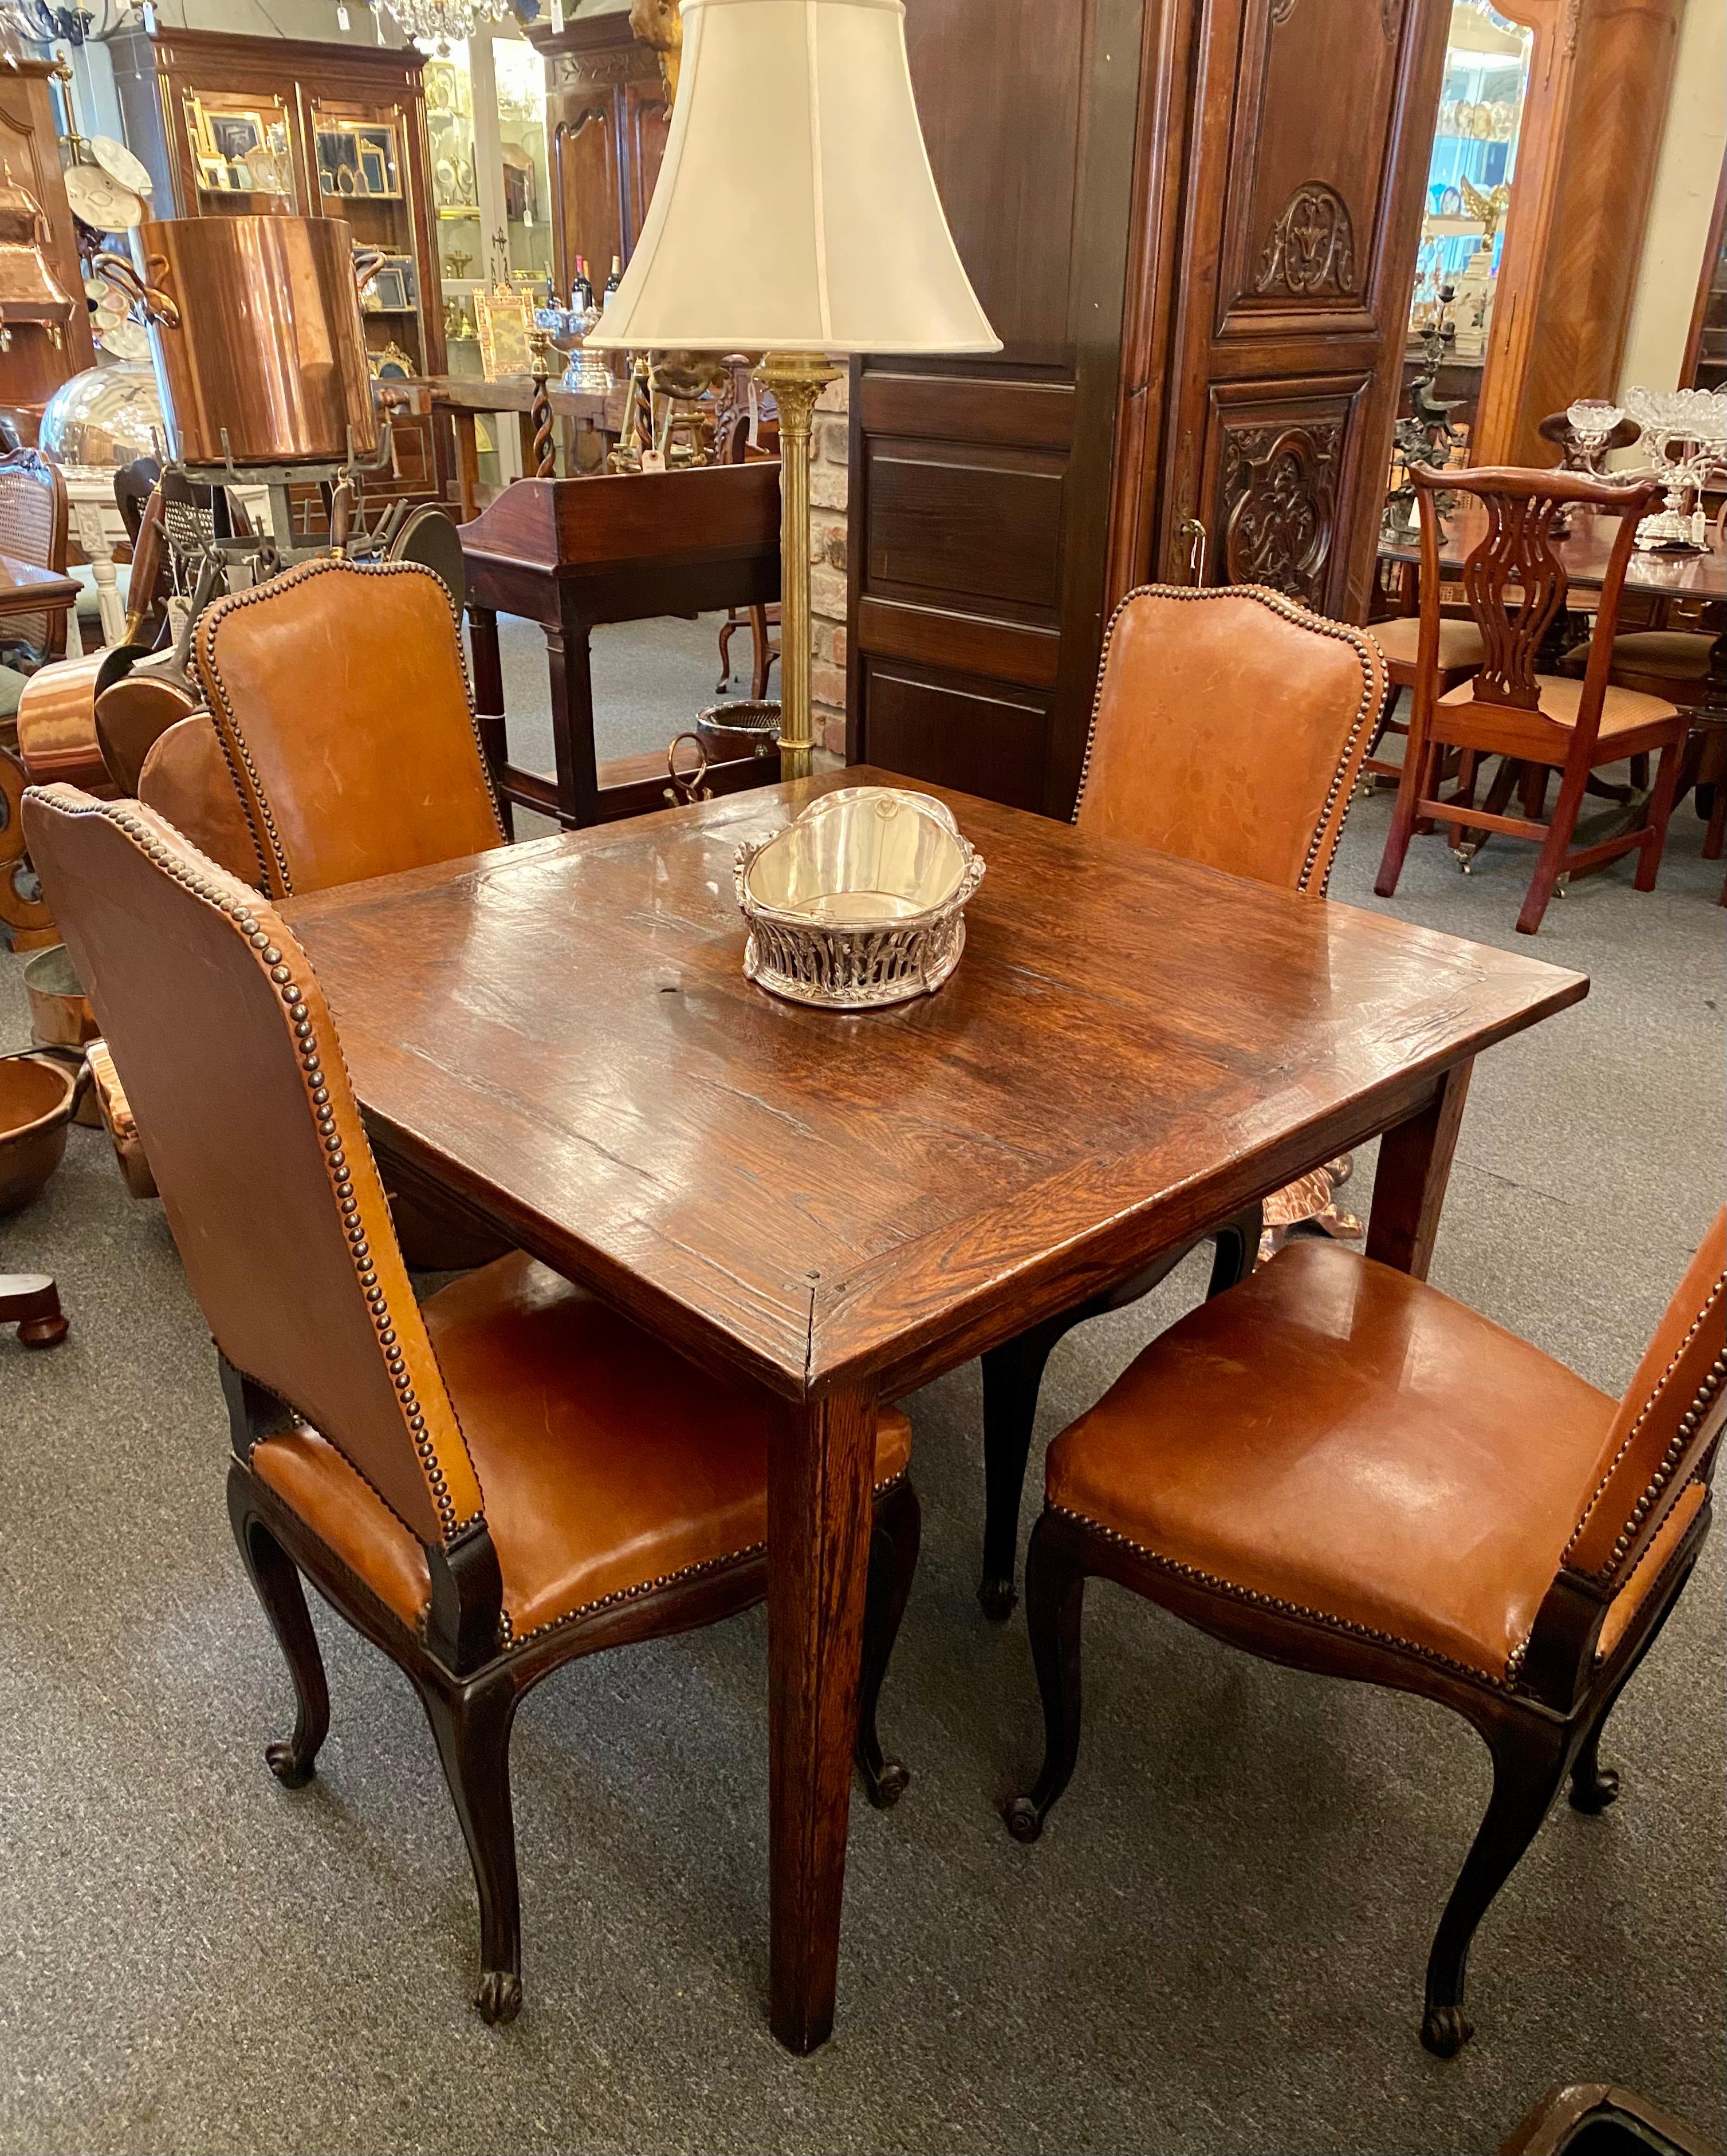 19th Century Set of 6 Antique Leather Dining Chairs with Grommets, Circa 1890-1910